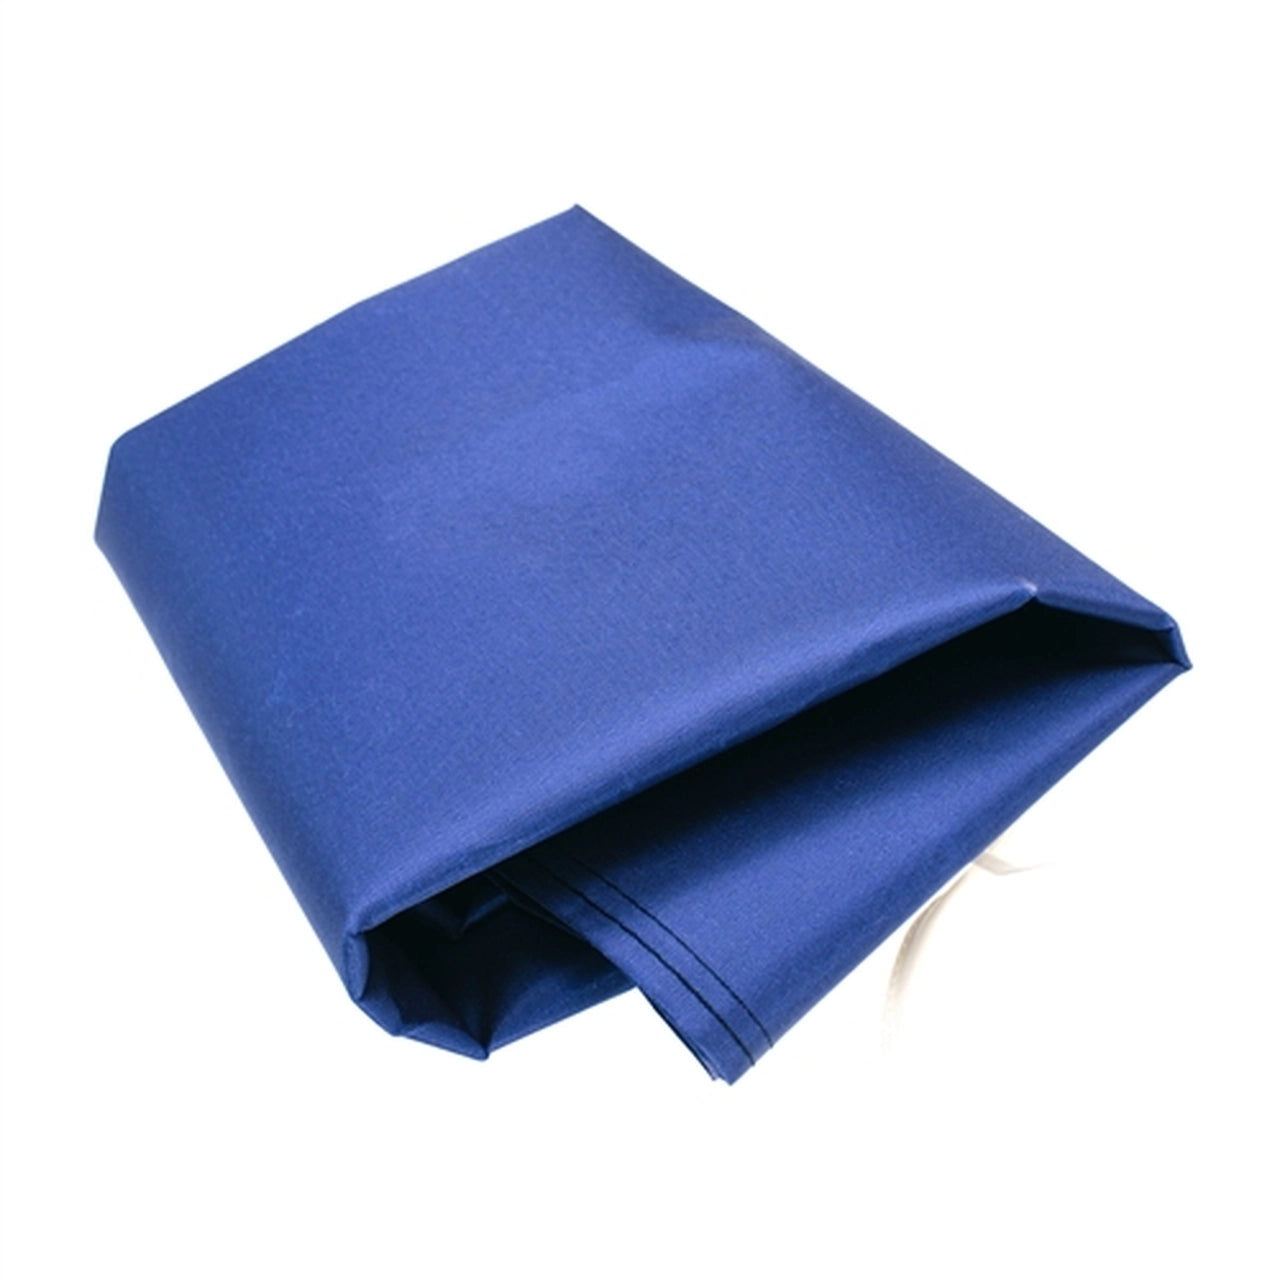 Aleko Protective Awning Cover - 10 x 8 Feet - Blue